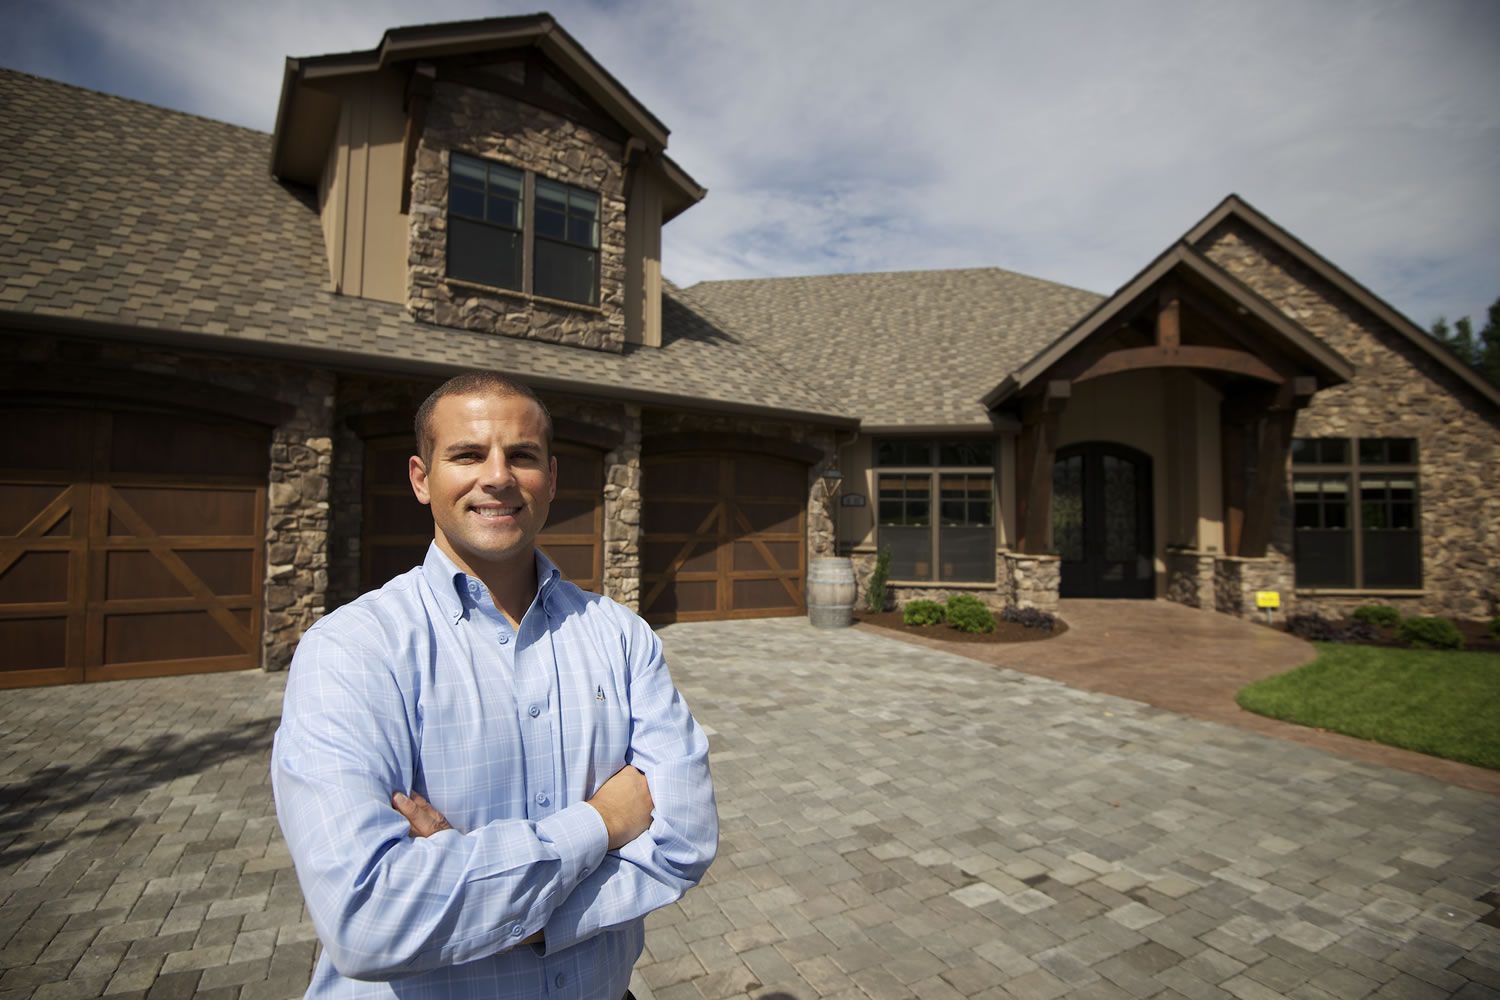 Patrick Ginn has quickly become Clark County's leading Realtor, with more than $76 million in sales in the past 12 months. Ginn, who is among the 100 top-selling Realtors in the state, has found his niche in selling high-end homes and has worked with builders and investors to build homes to satisfy rising demand.